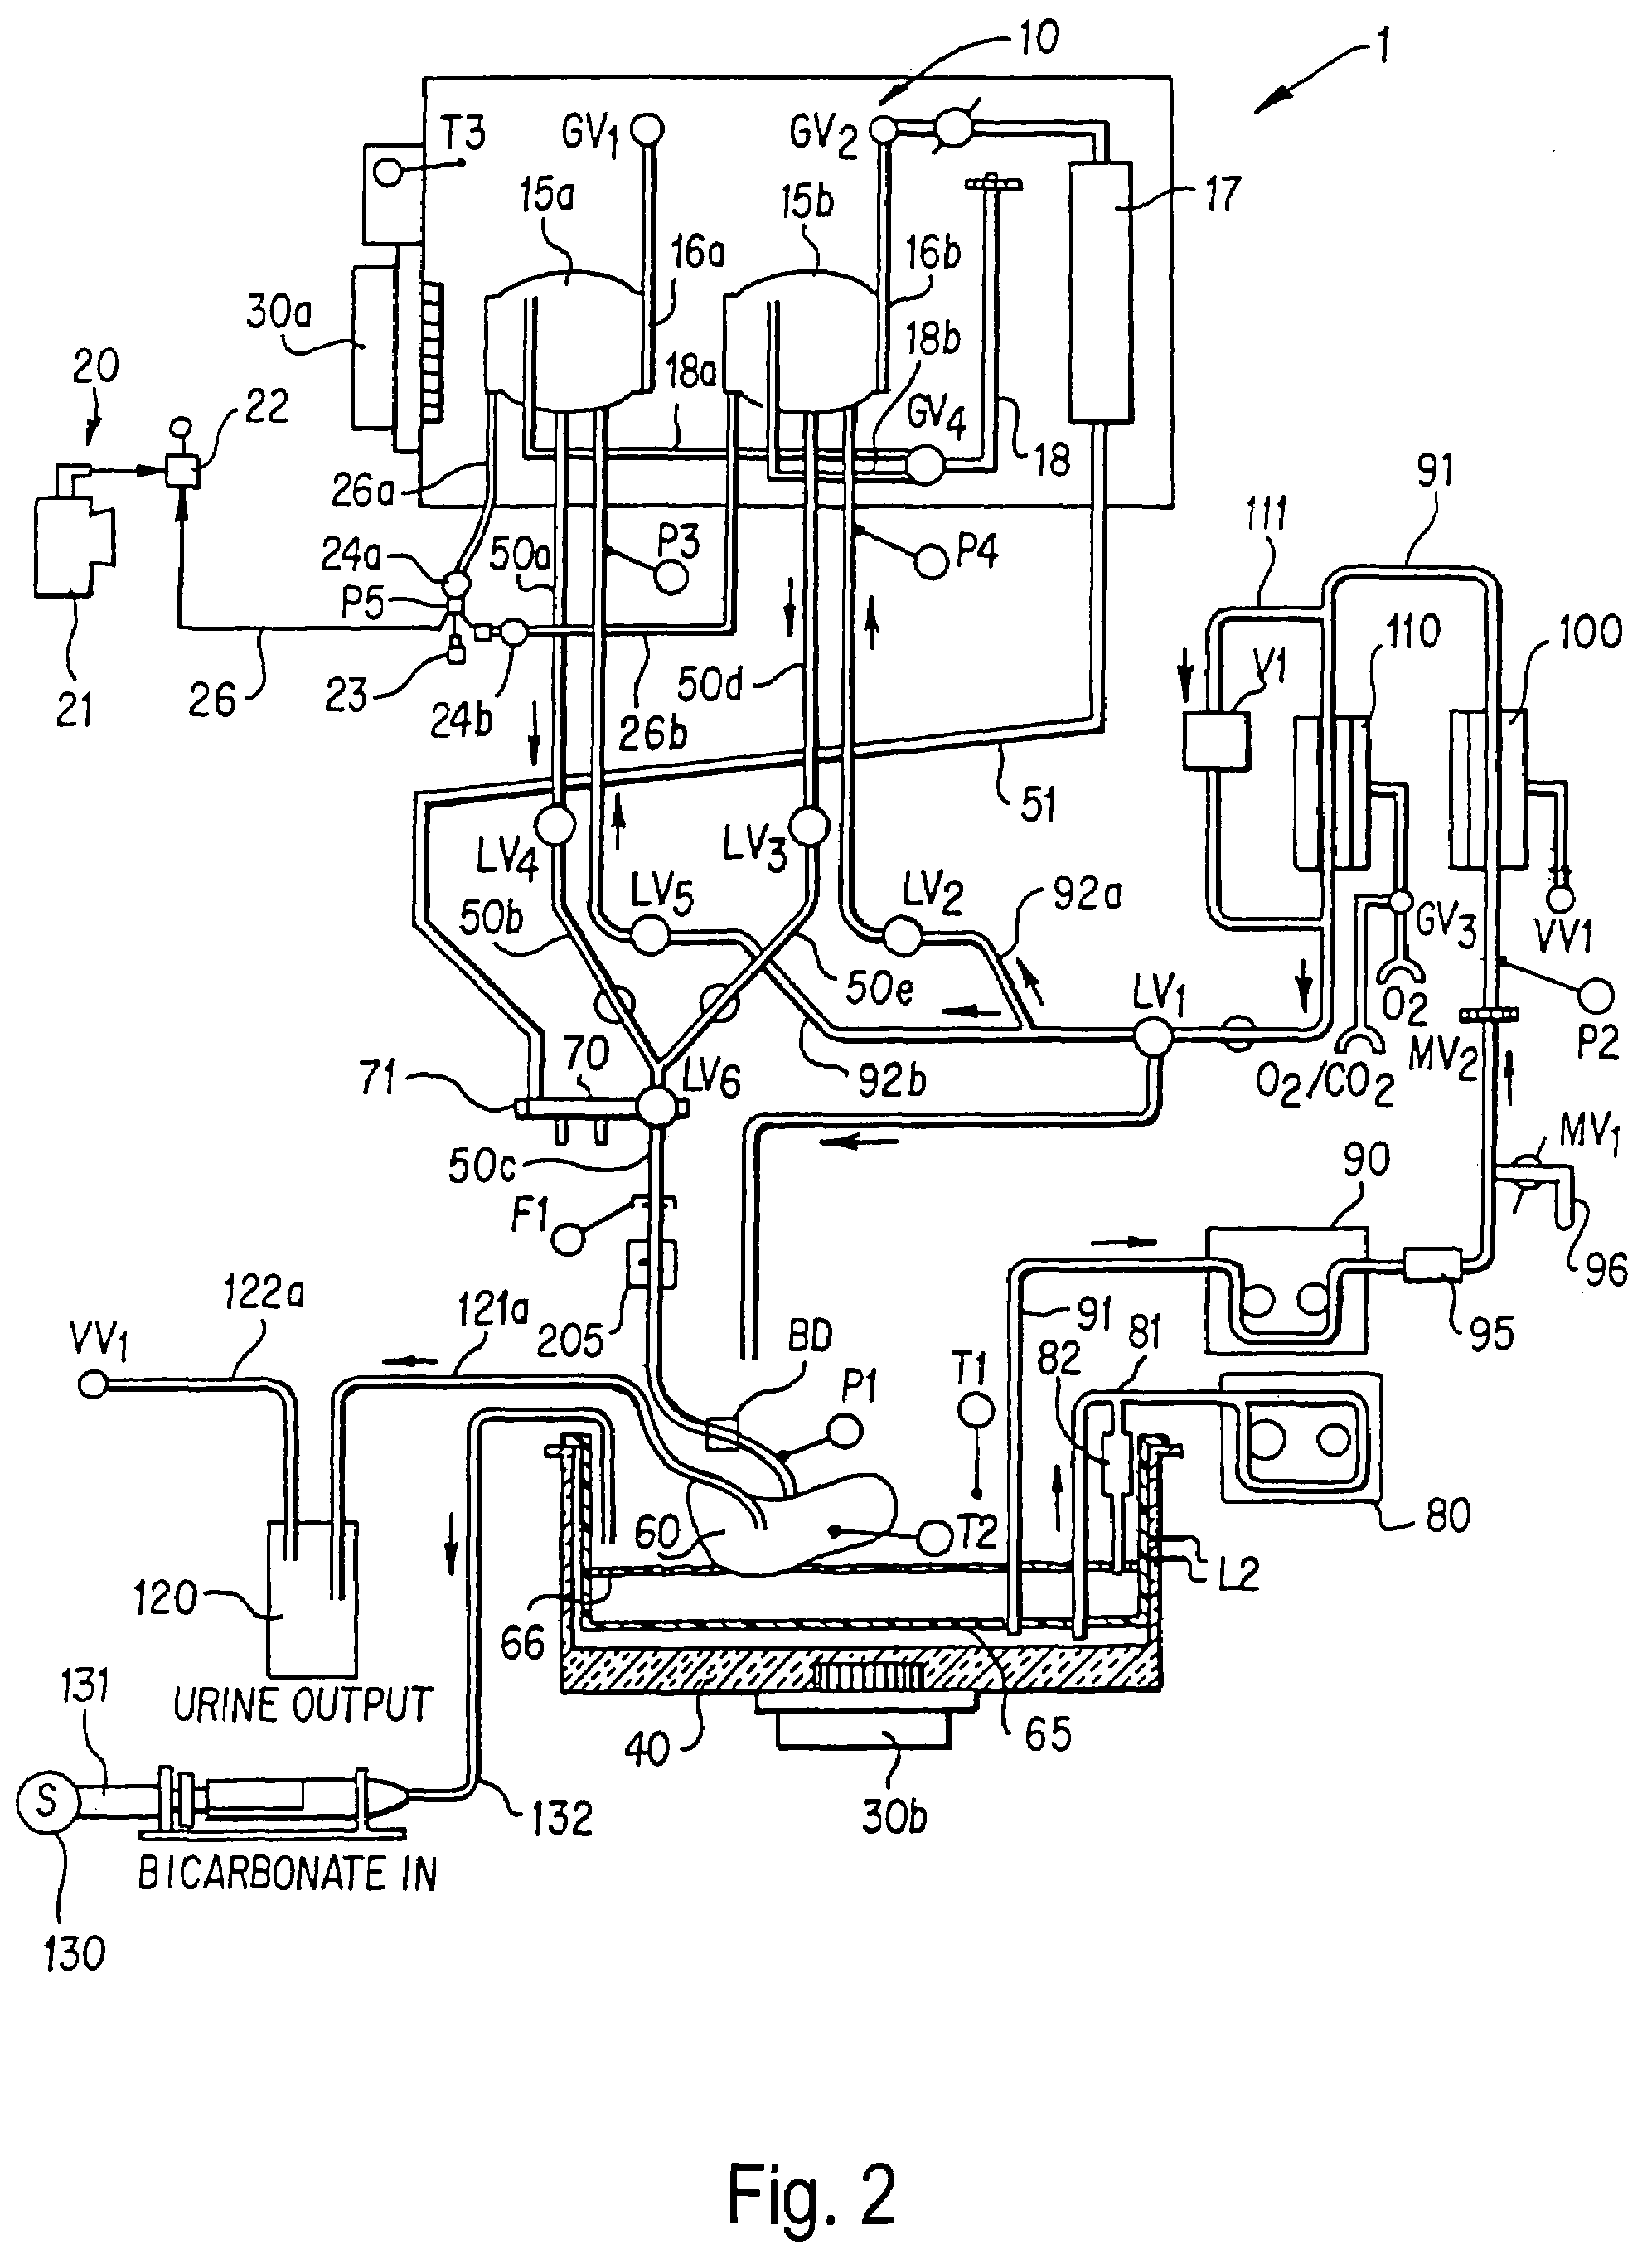 Method and apparatus for transferring heat to or from an organ or tissue container